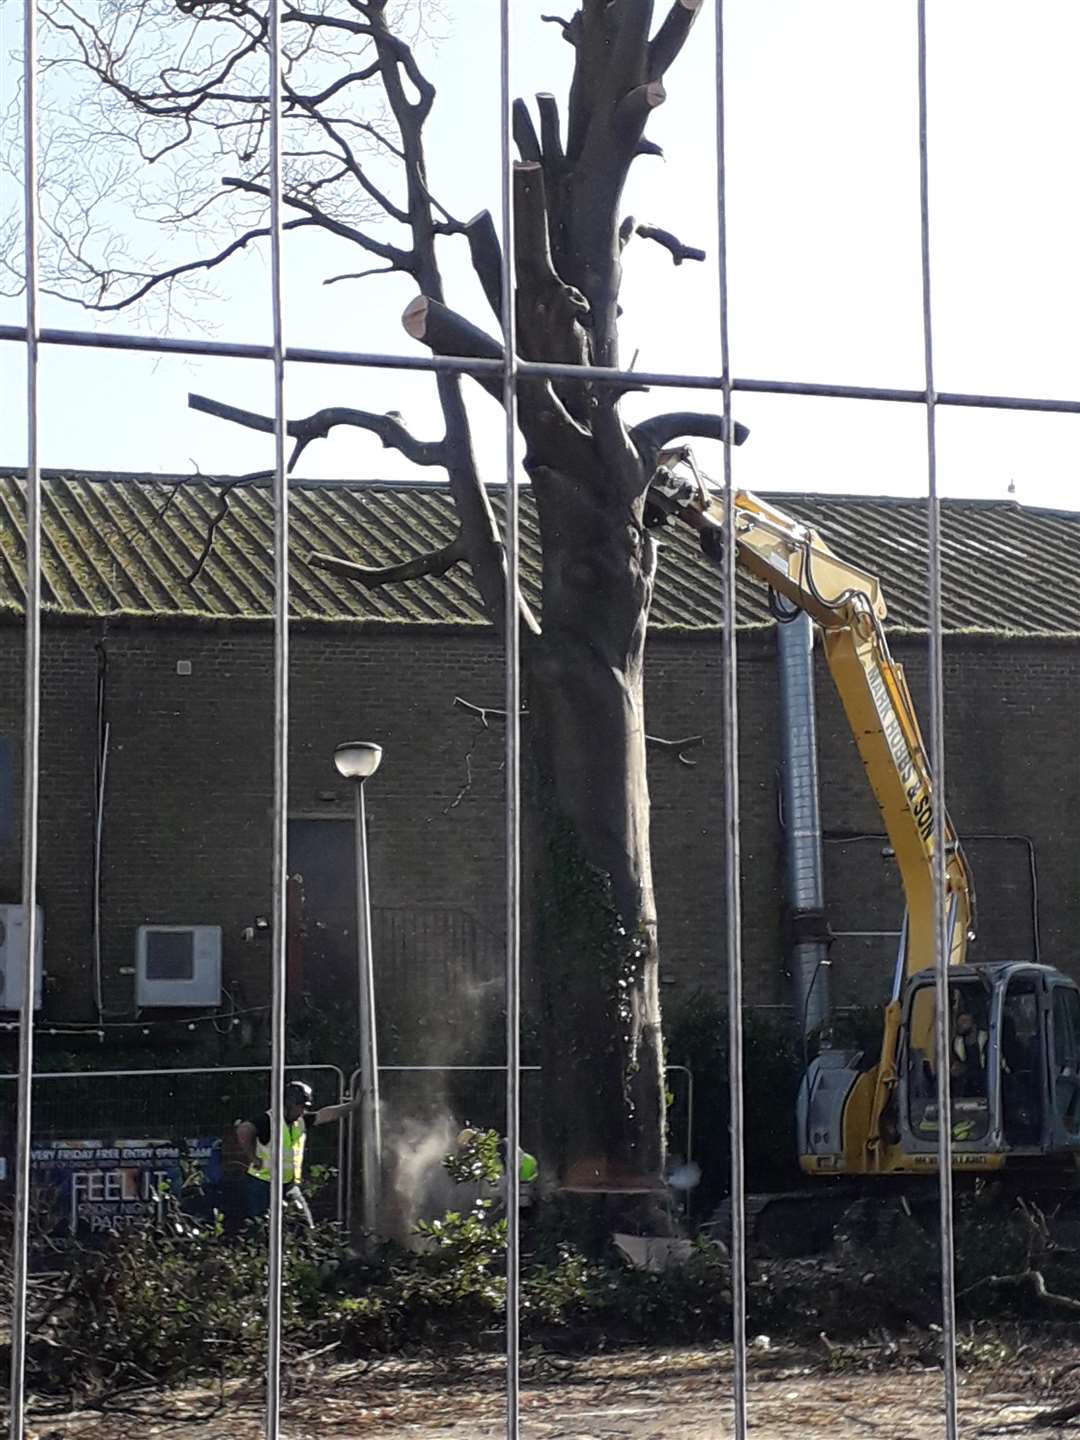 Aldi begins its demolition programme with the removal of the site's mature trees Picture: Nigel Lewis